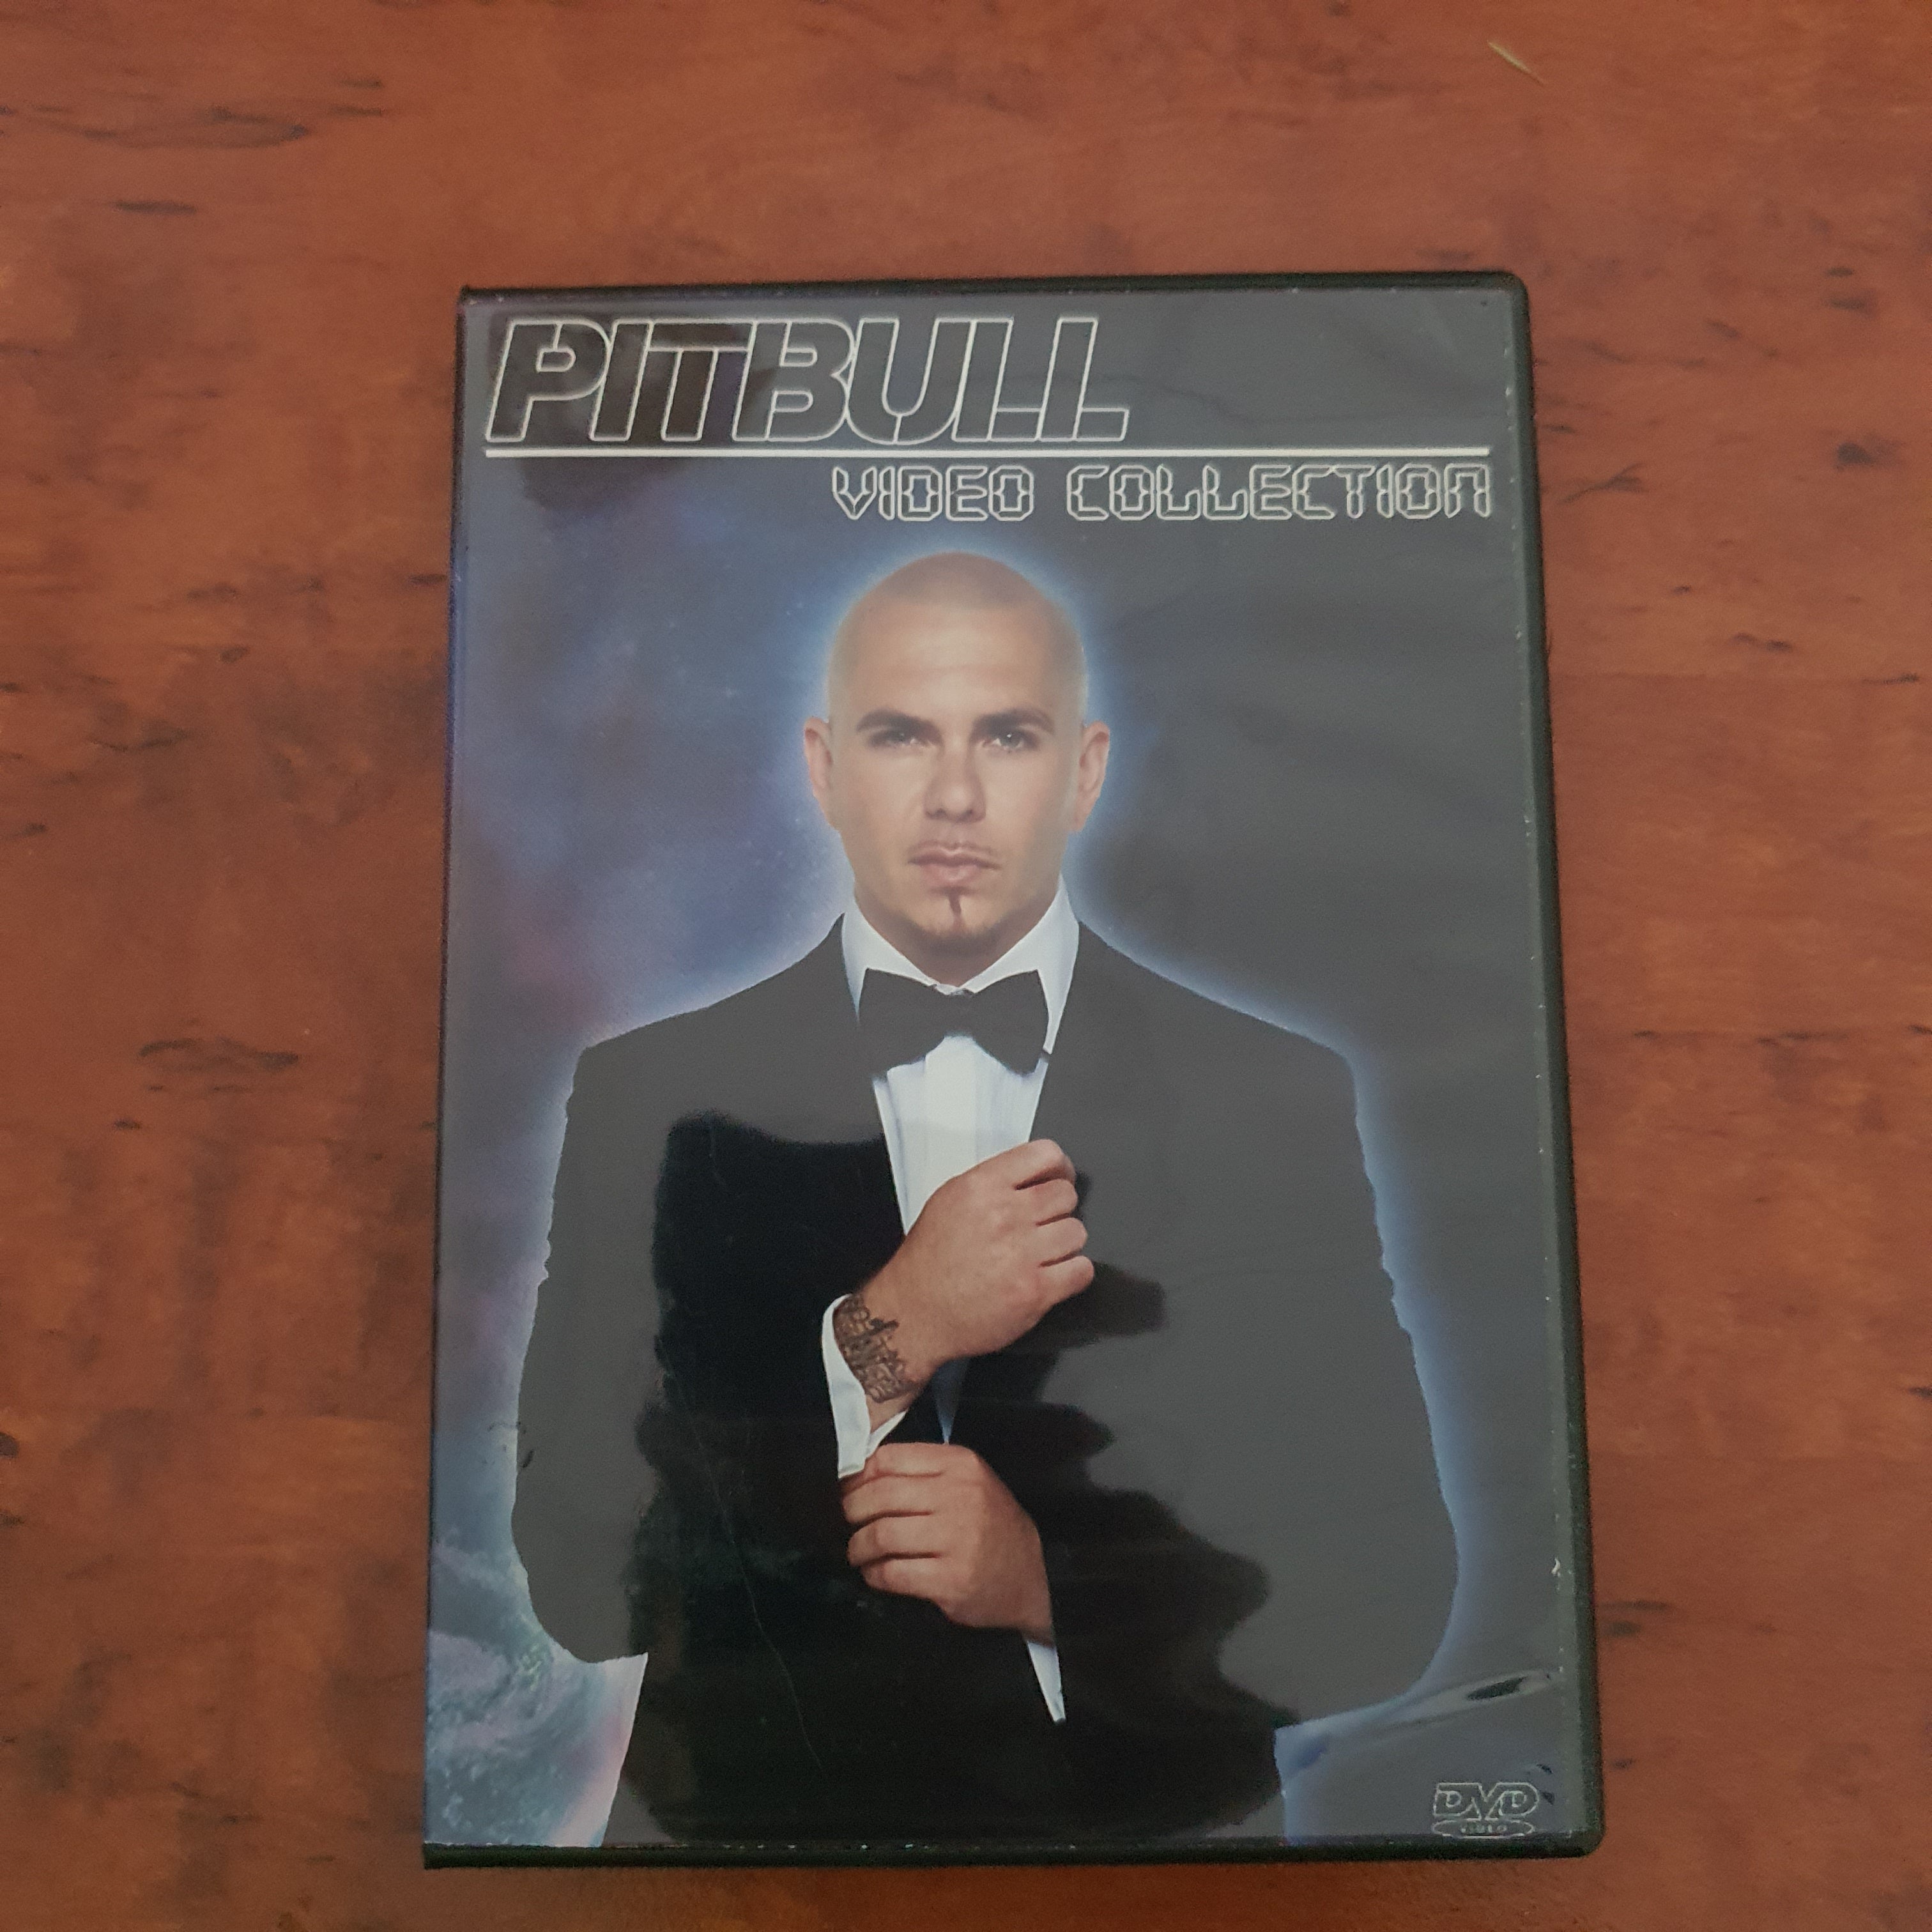 PITBULL VIDEO COLLECTIONS